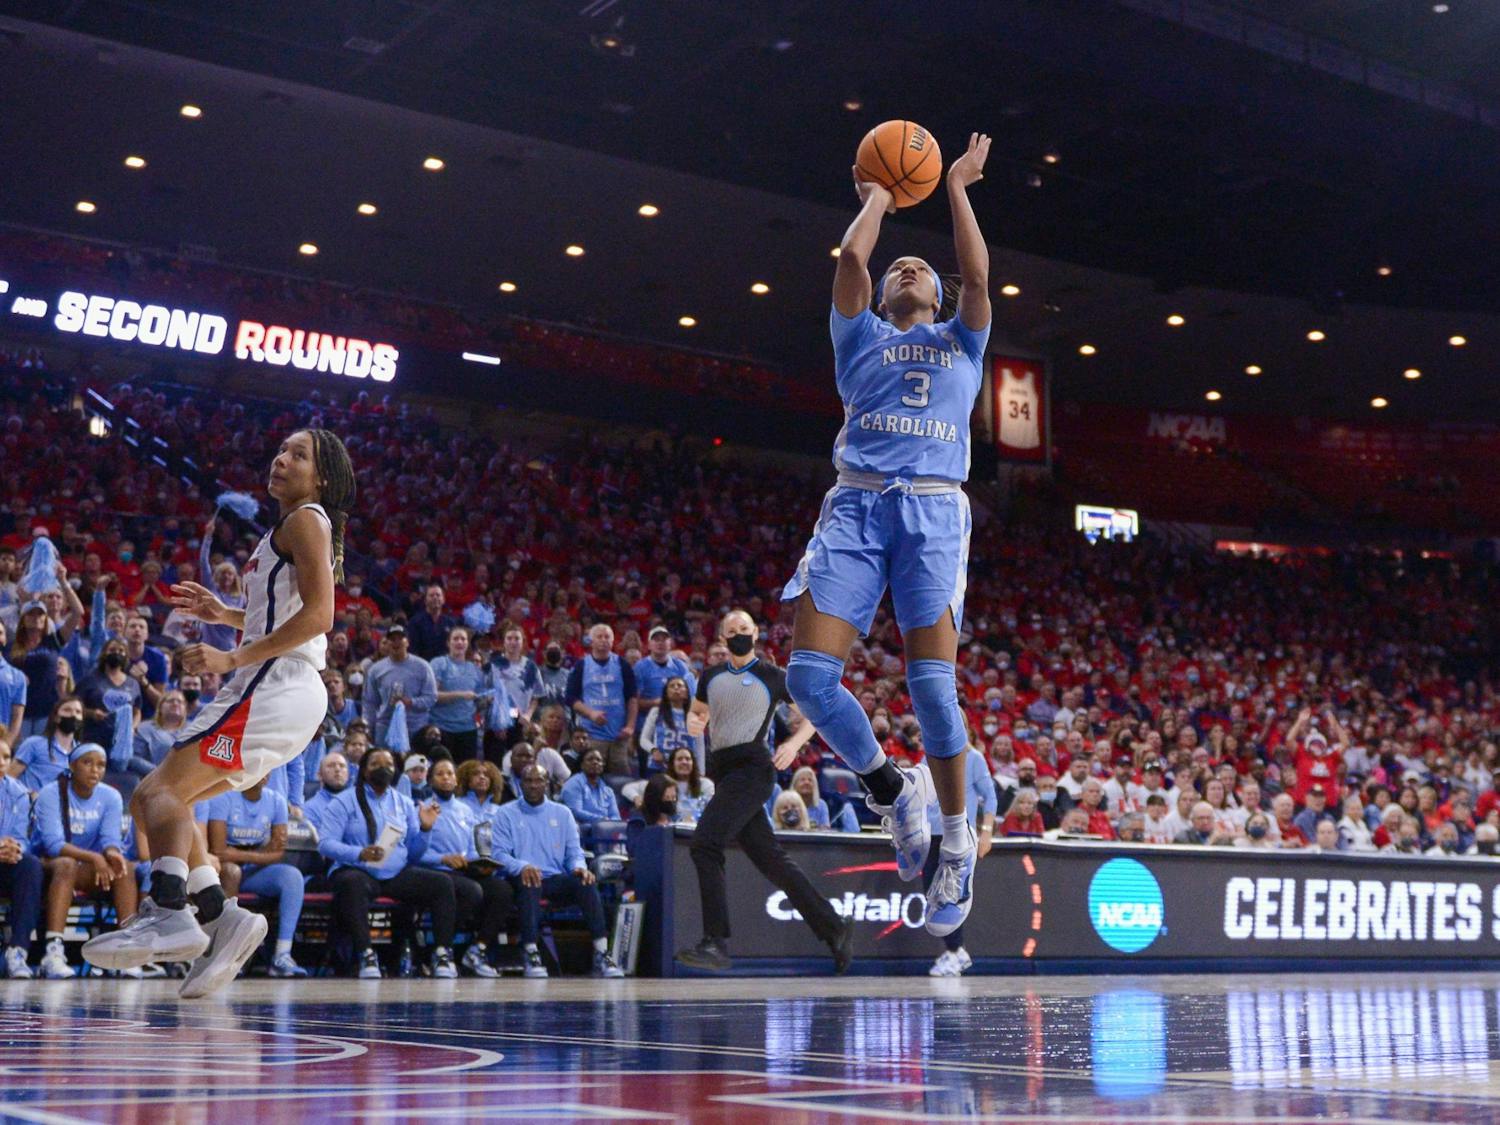 Sophomore guard Kennedy Todd-Williams (3) shoots the ball during UNC's second-round NCAA Tournament game against Arizona in Tucson, Ariz., on Monday, March 21, 2022. UNC won, 63-45, to advance to the Sweet 16.